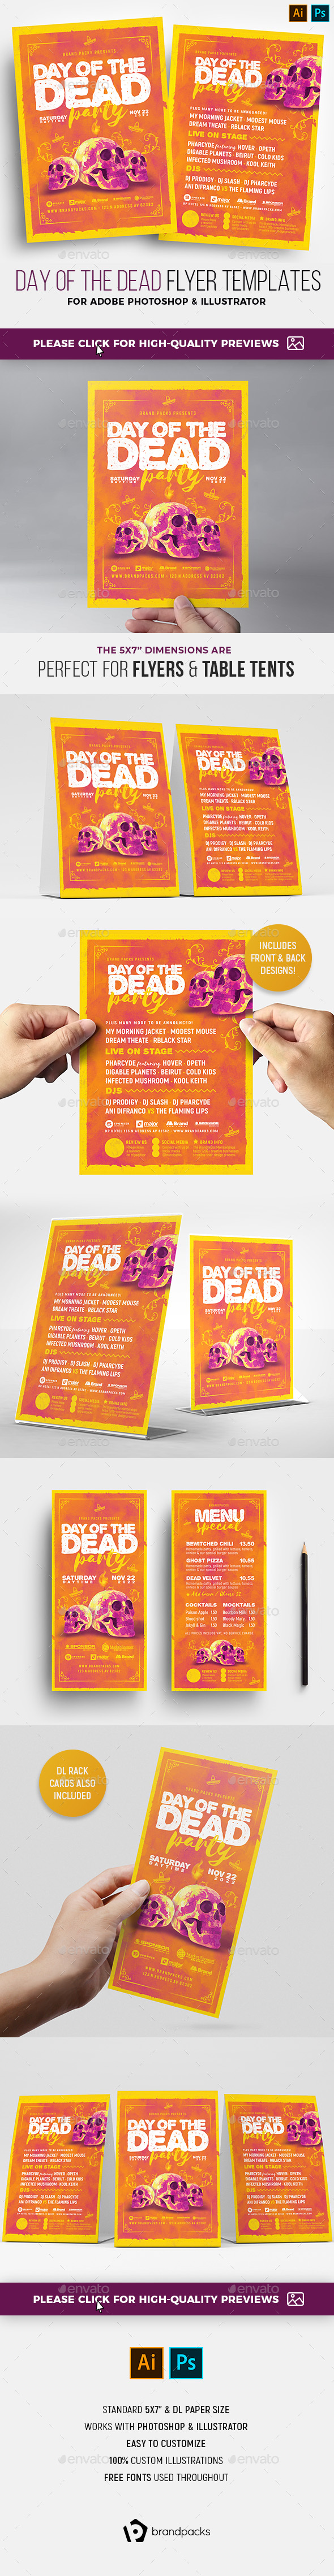 Day of The Dead Flyer